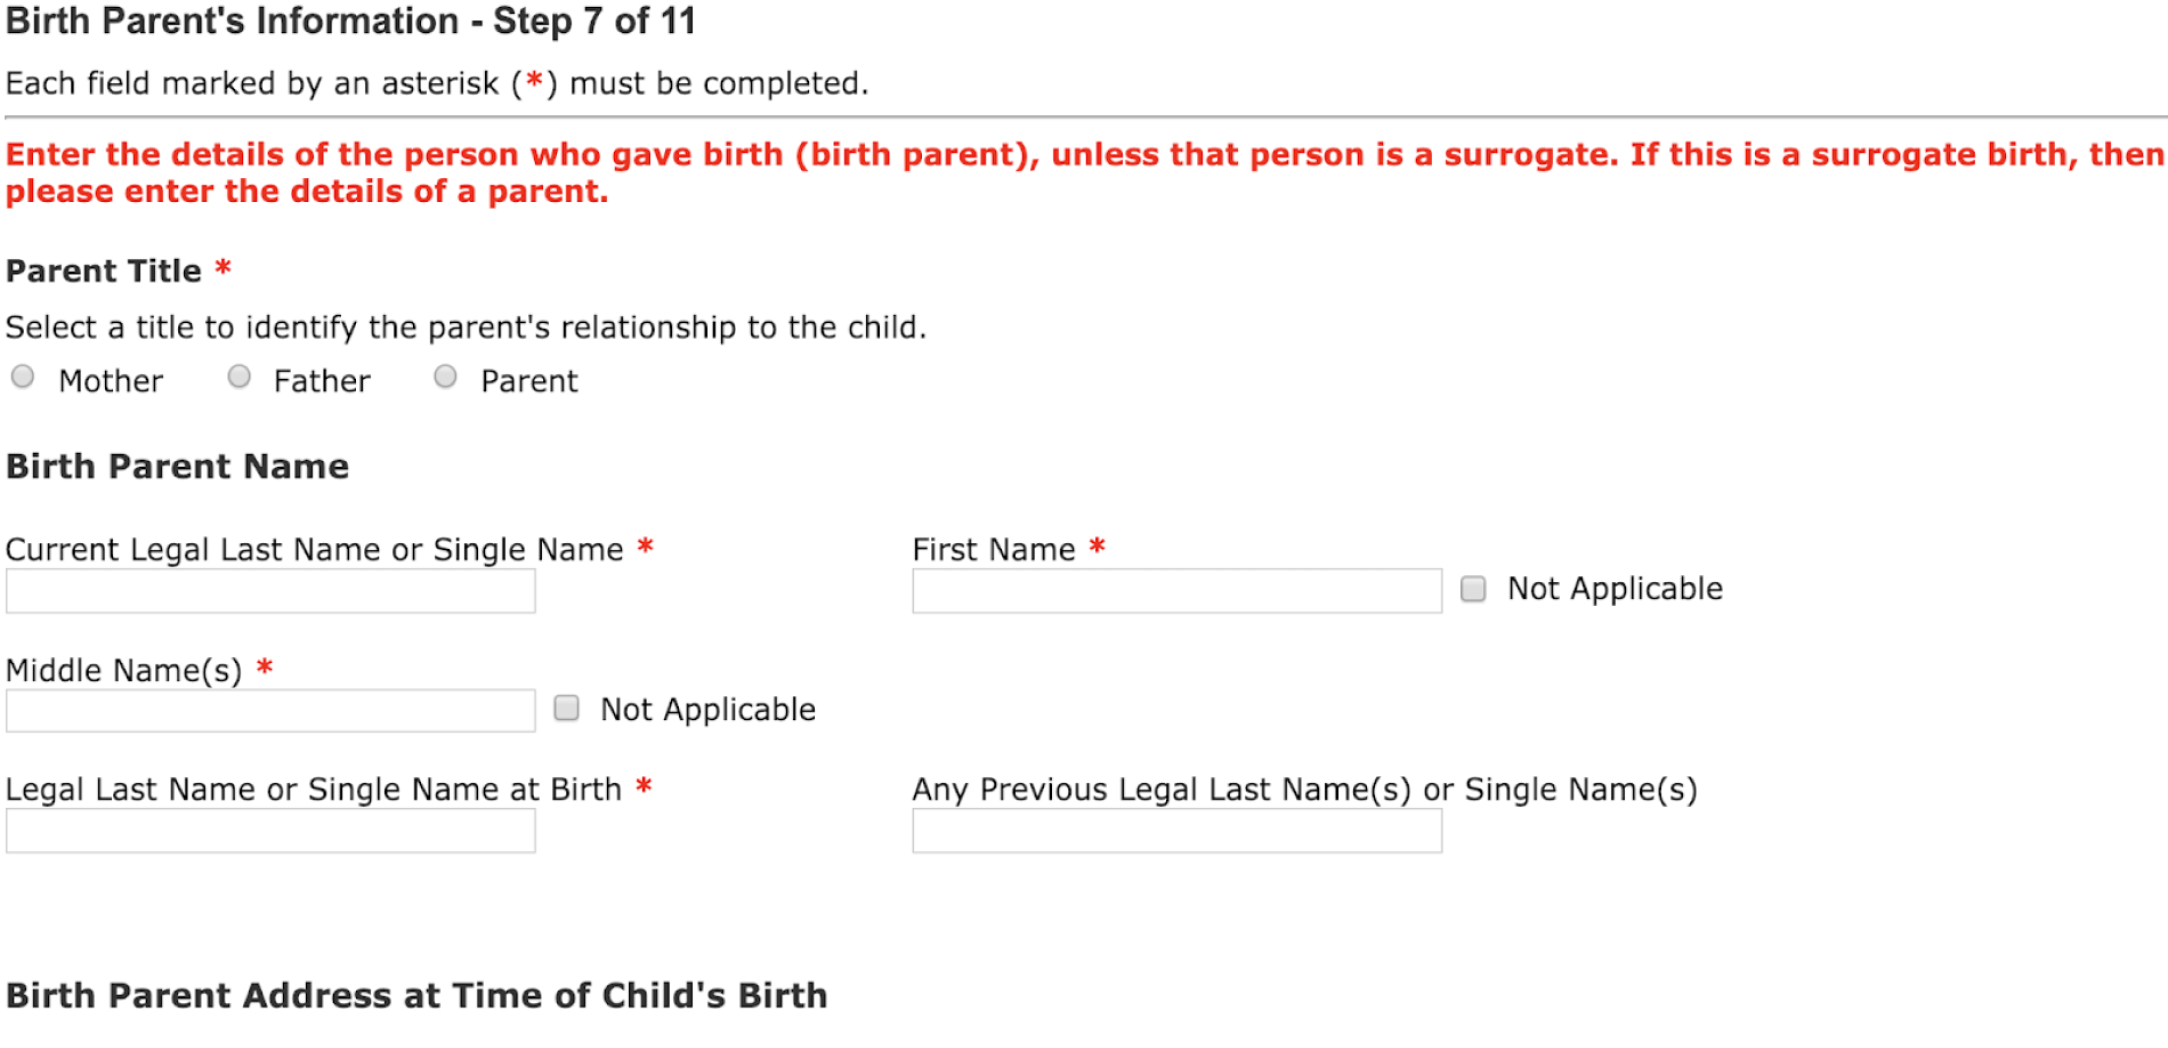 Section is labelled birth parent's information